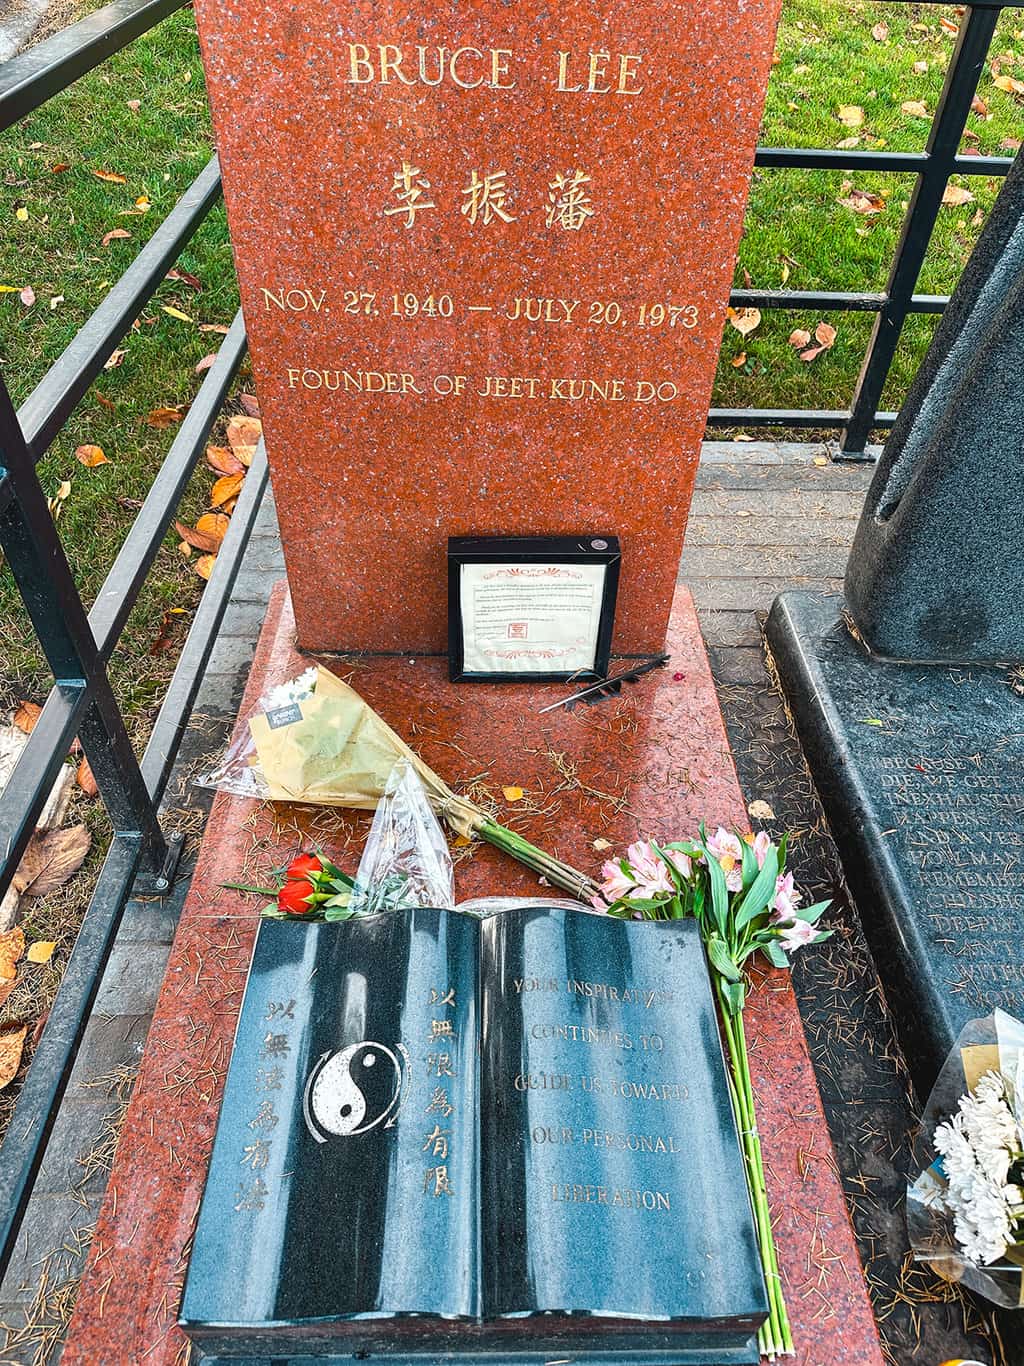 Detail of Bruce Lee's Grave in Lakeview Cemetery in Seattle- Photo credit Keryn Means, a travel expert at TwistTravelMag.com